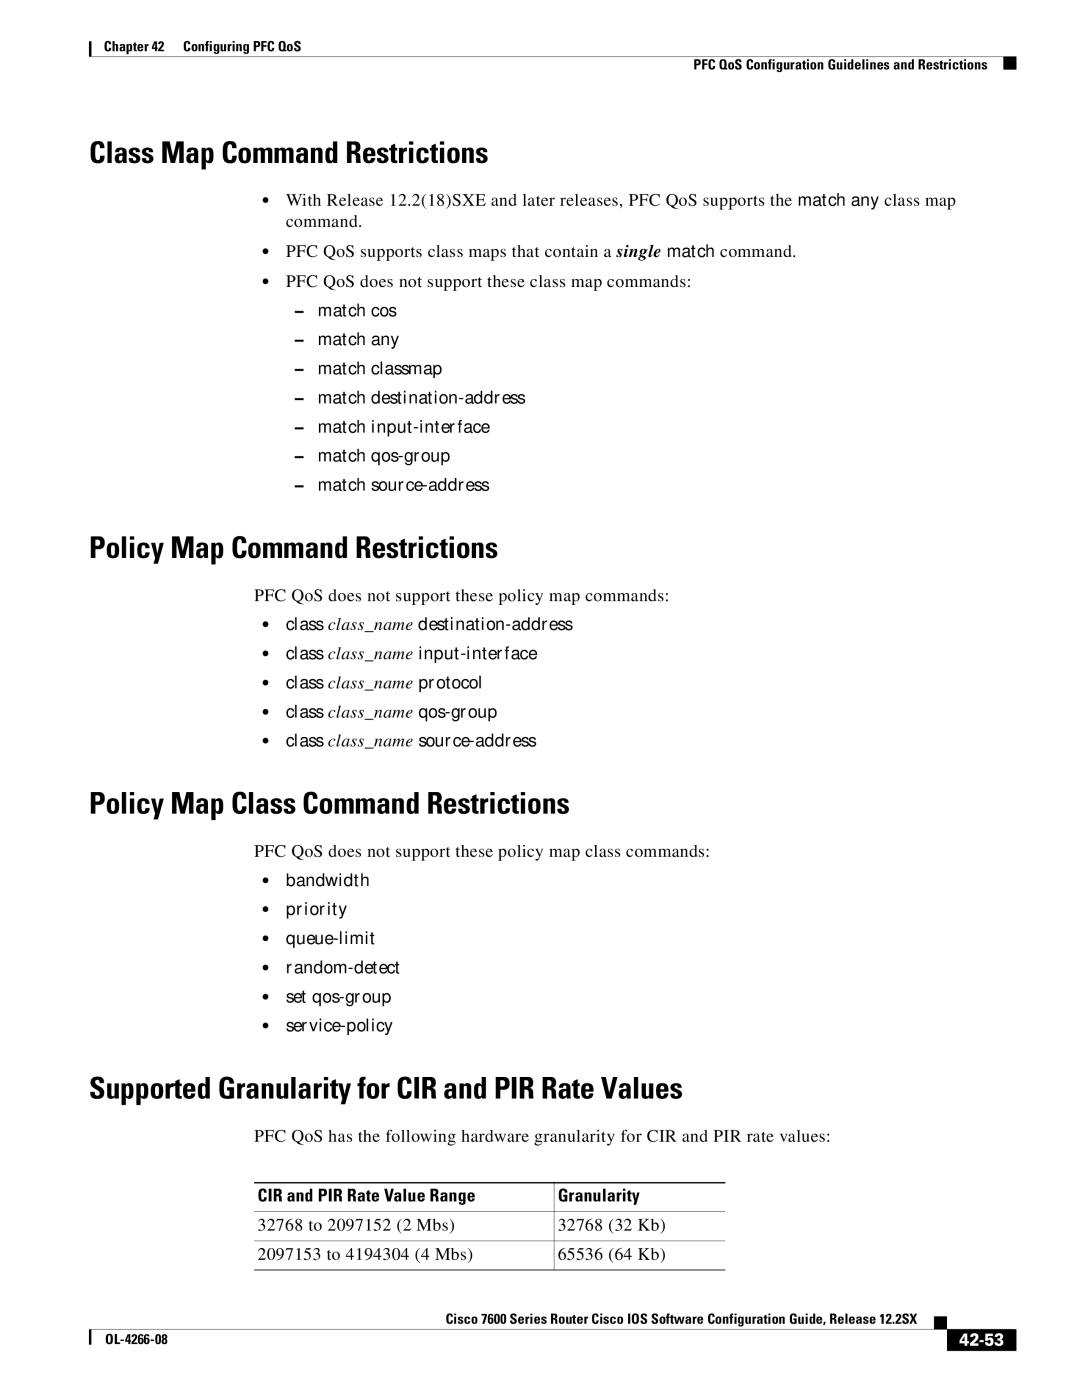 Cisco Systems OL-4266-08 manual Class Map Command Restrictions, Policy Map Command Restrictions, 42-53 